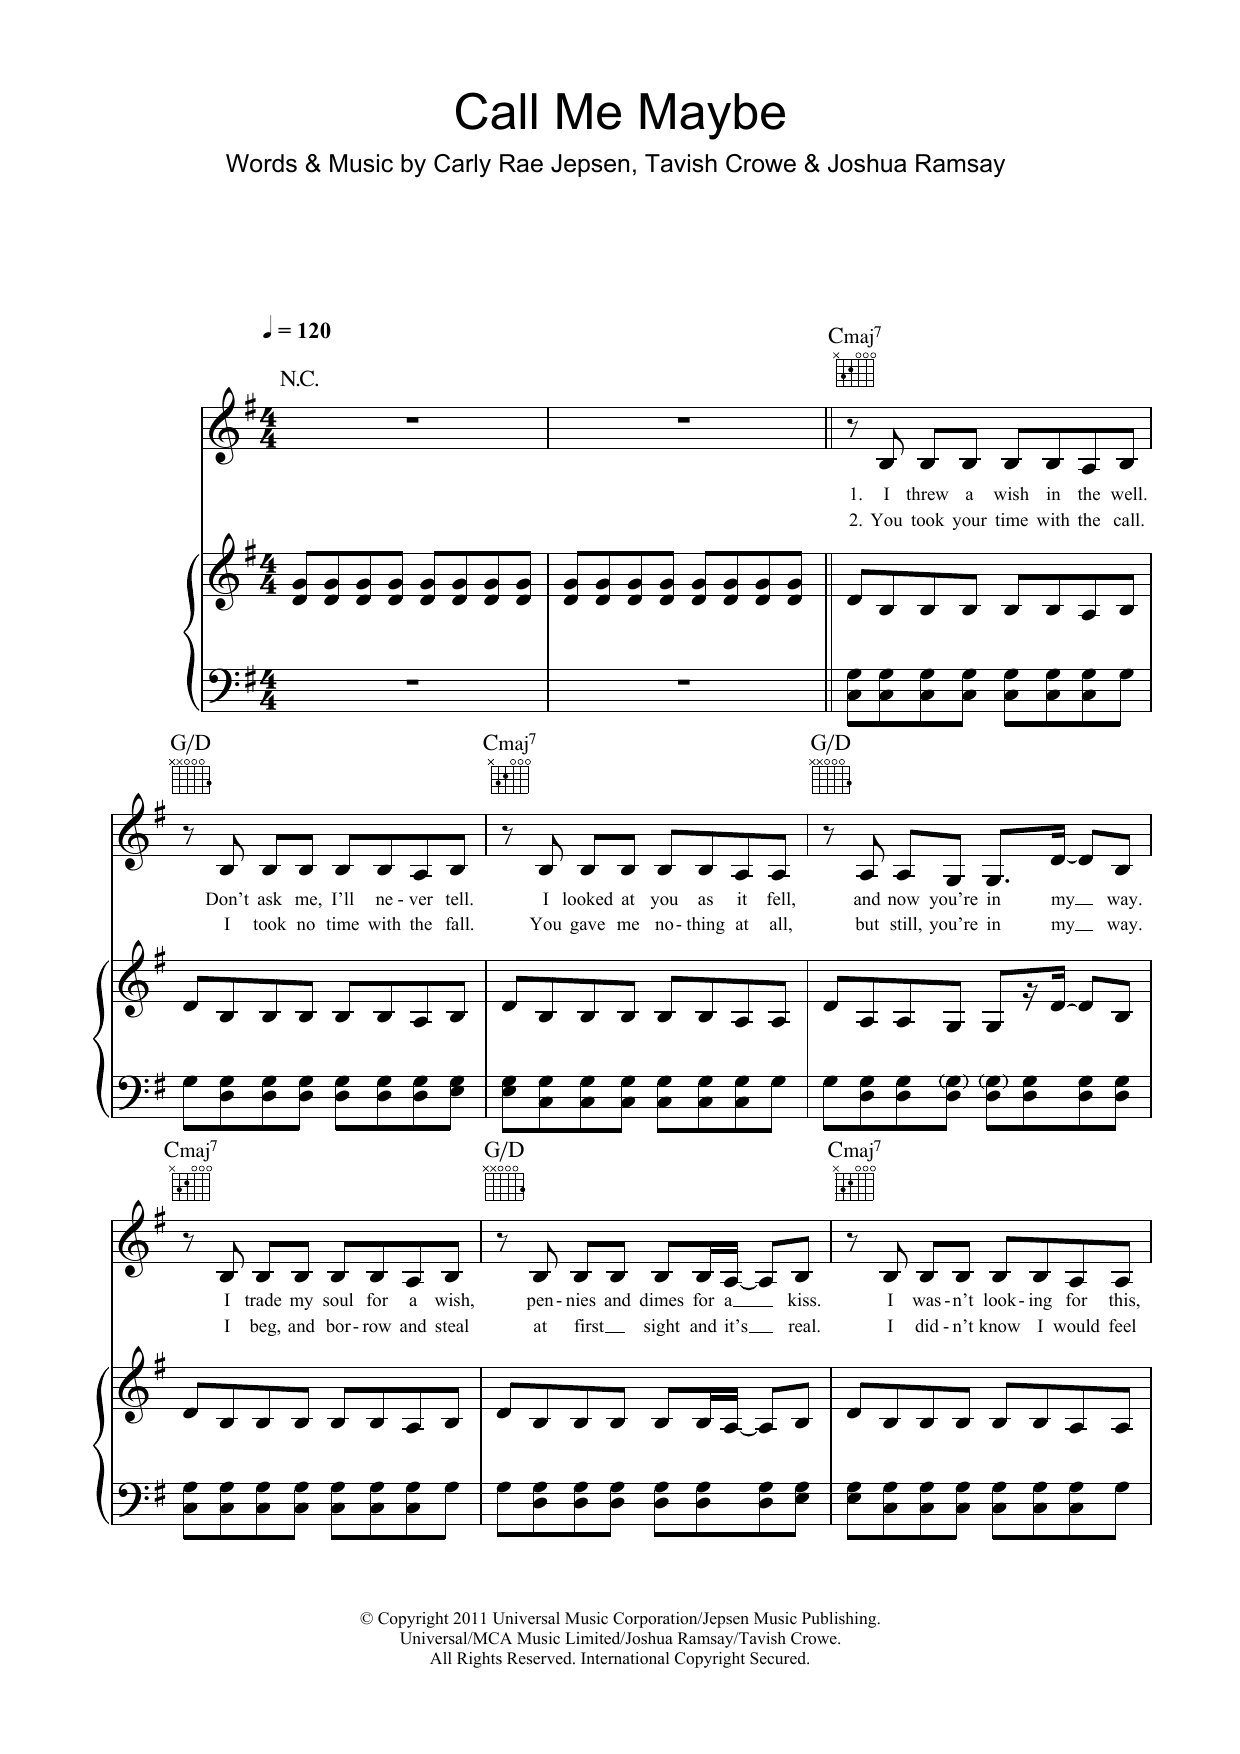 Call Me Maybe Sheet Music By Carly Rae Jepsen For Piano Vocal Guitar Noteflight Marketplace